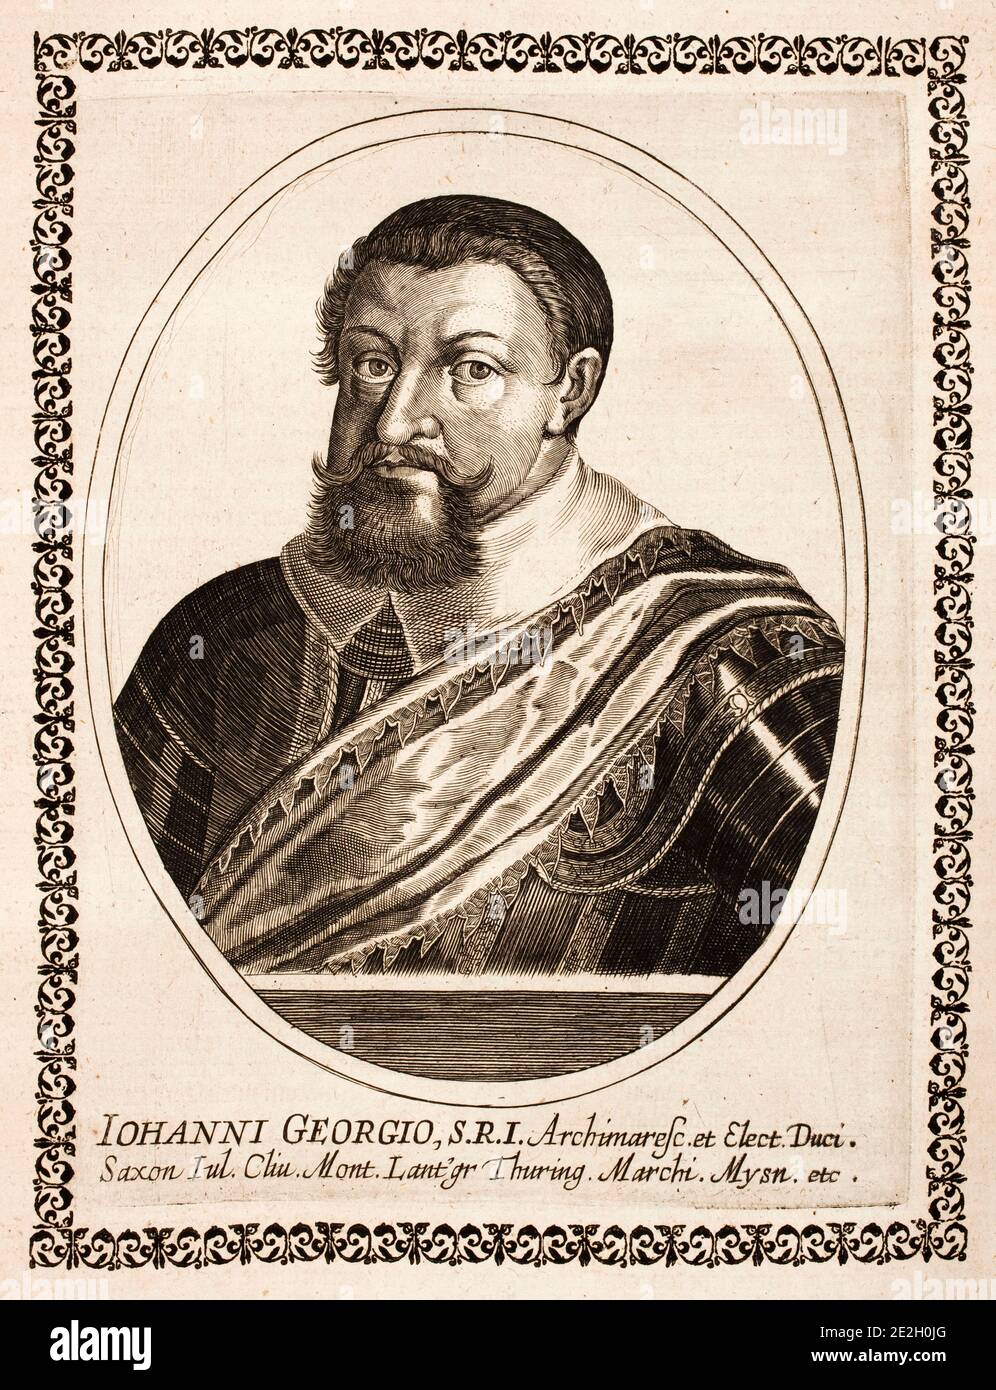 Euroean ruler of 16-17th centuries. Portrait of John George I, Elector of Saxony (1585-1656). Amsterdam, 1642 Stock Photo